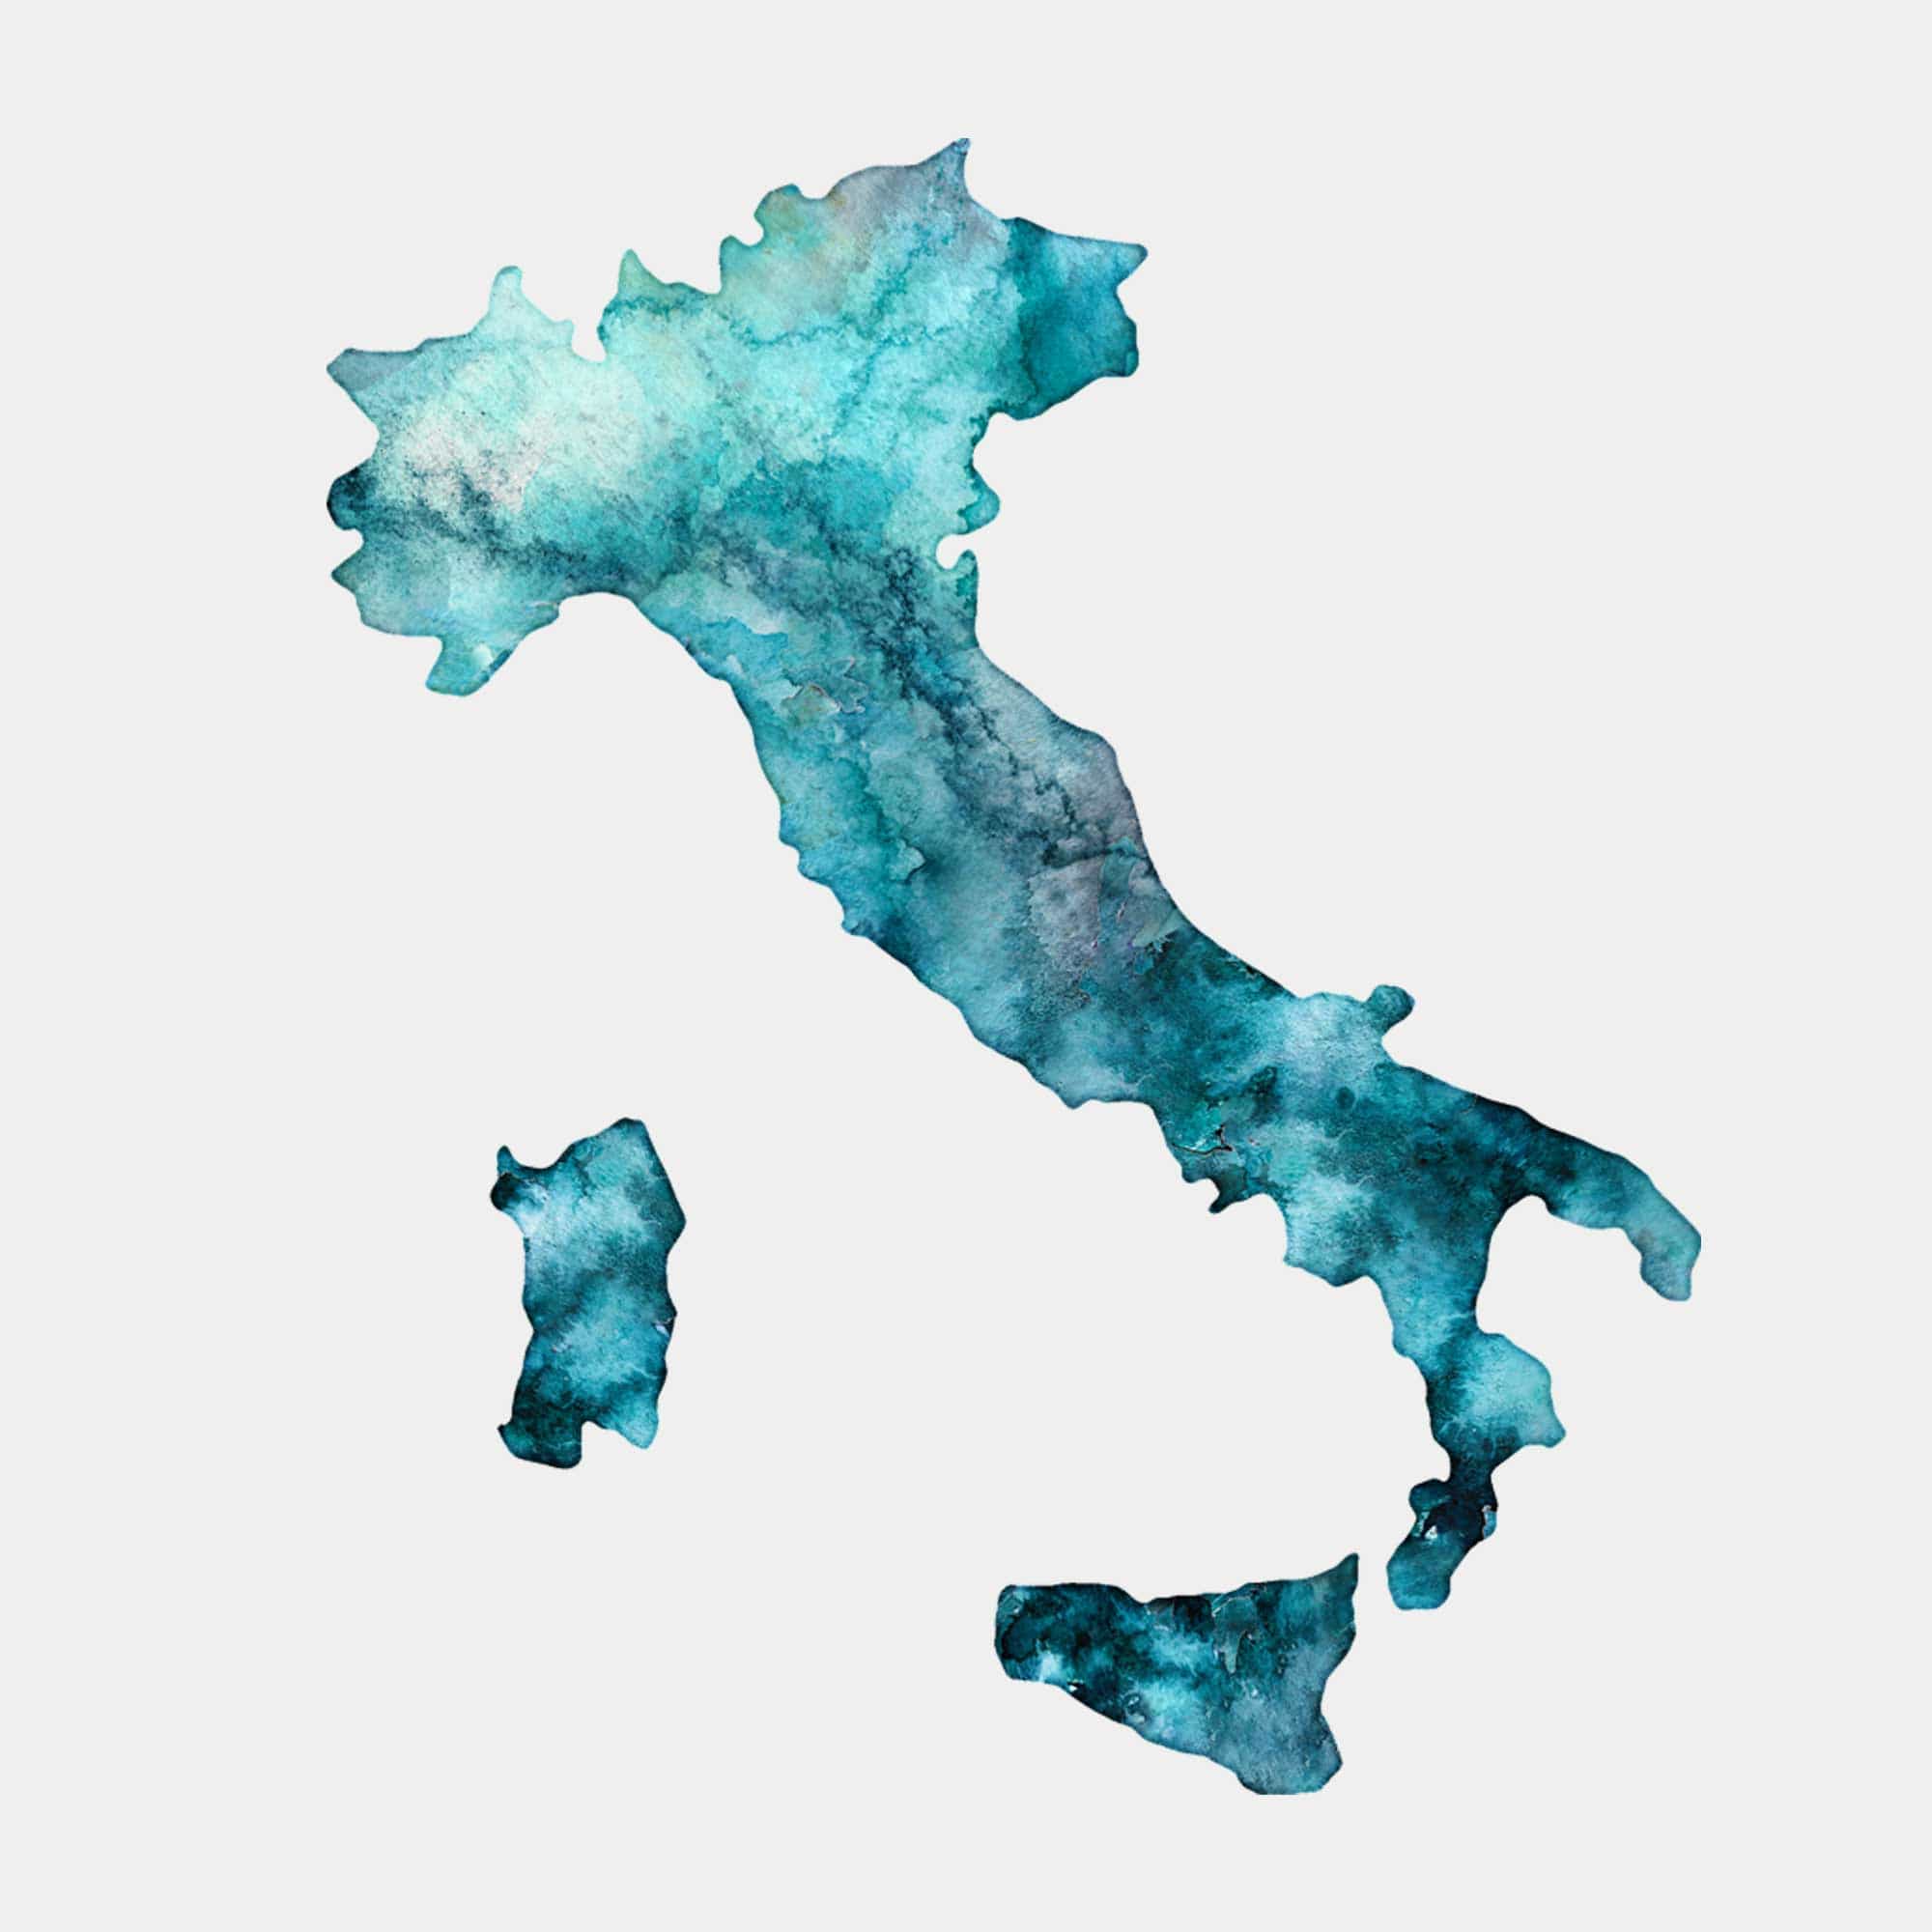 EJayDesign Countries Other Italy Watercolour Map